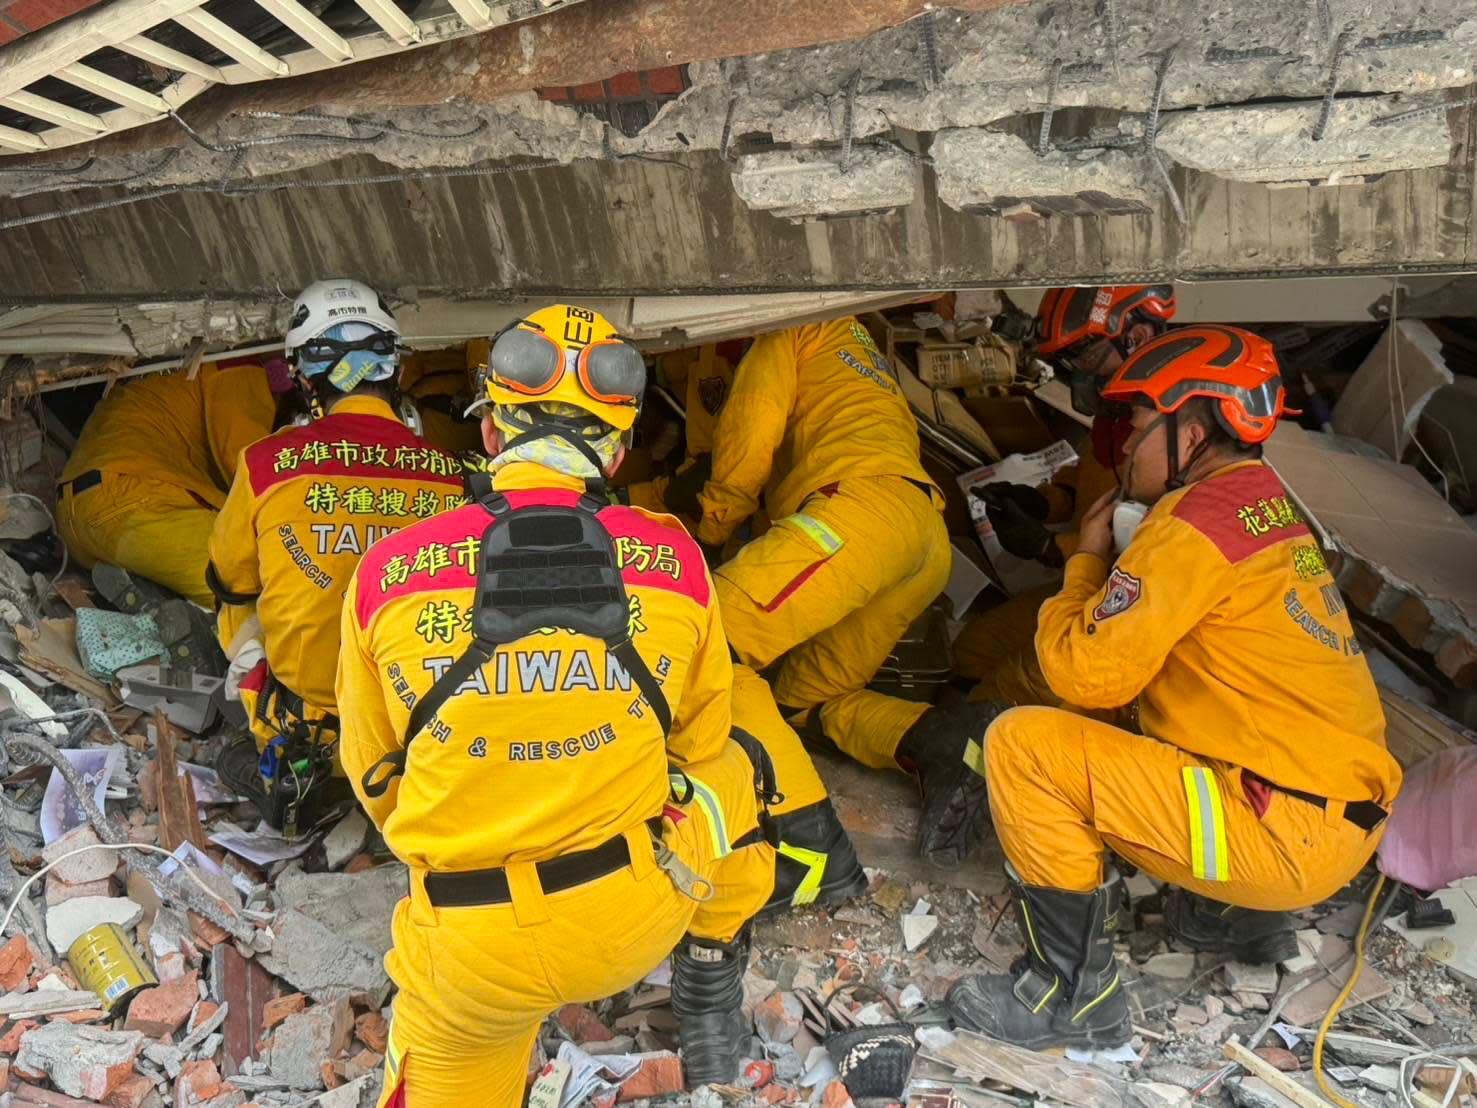 Rescue workers search for survivors under the rubble of a collapsed building in Hualien City.